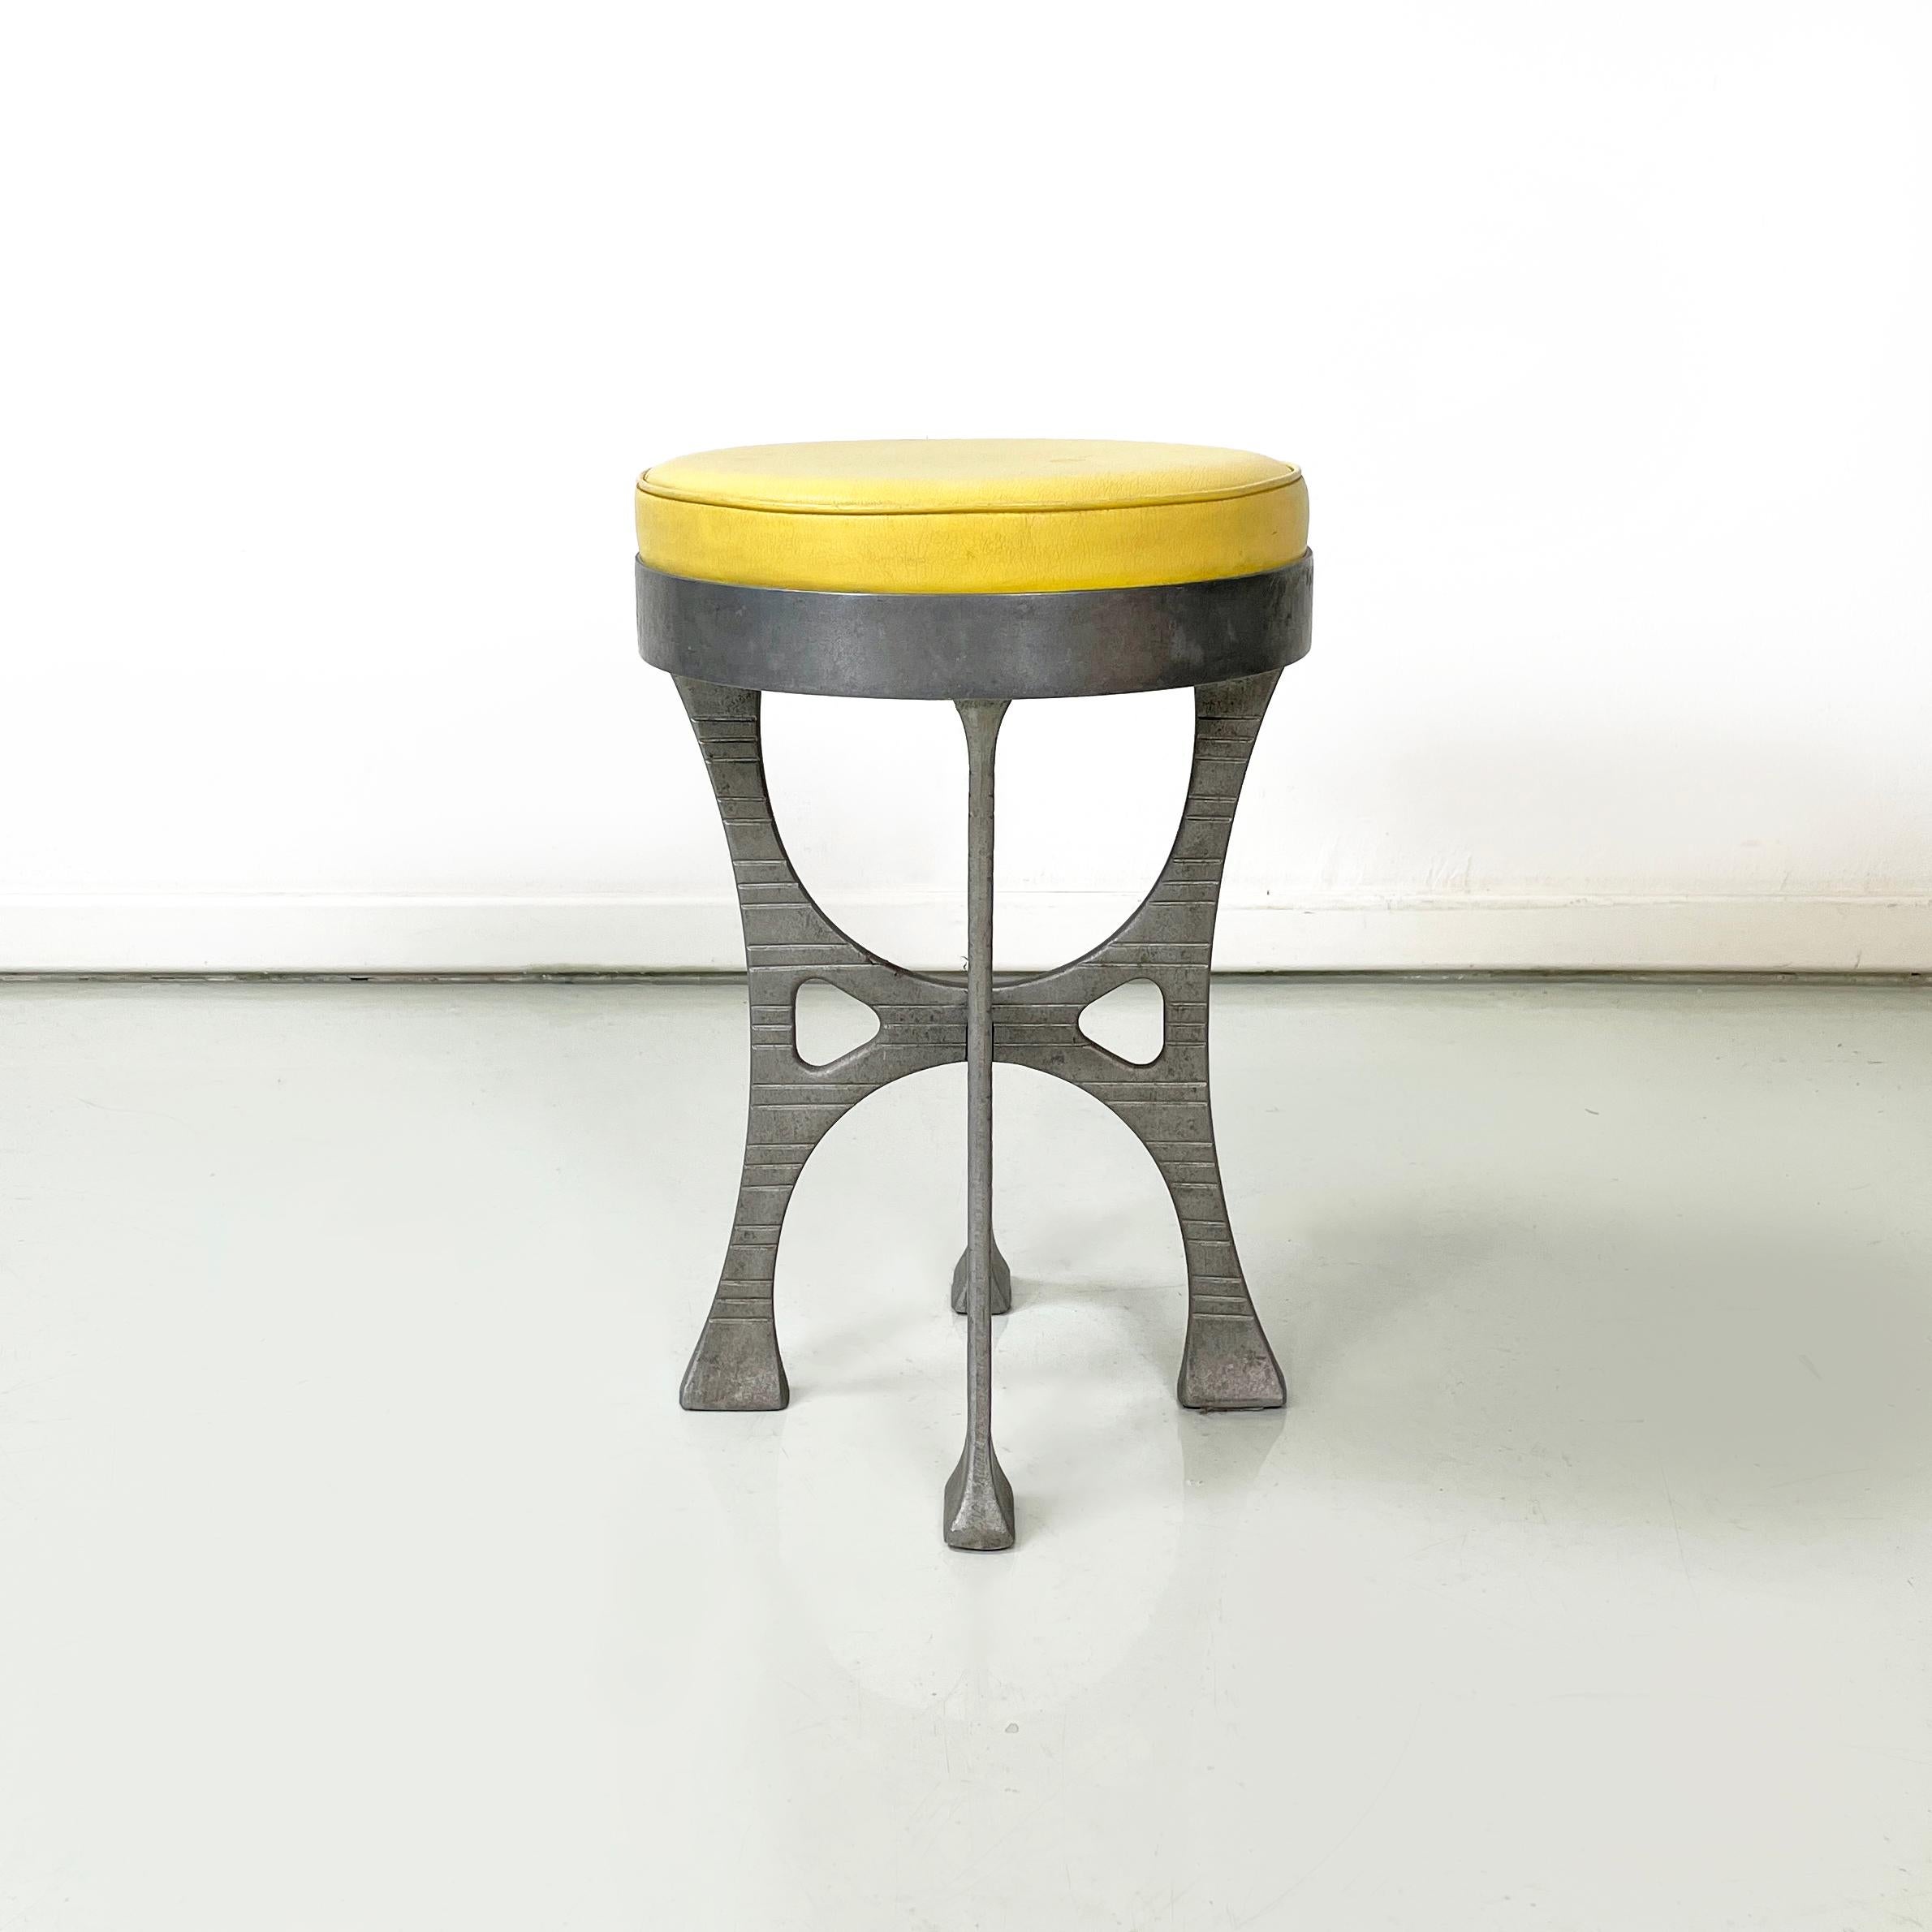 Italian modern Round stool in yellow leather and aluminium, 1940s
Stool with round seat, padded and covered in yellow leather. The structure is in cast aluminium. The paws are decorated with horizontal lines. Square feet.
1940 approx.
Vintage